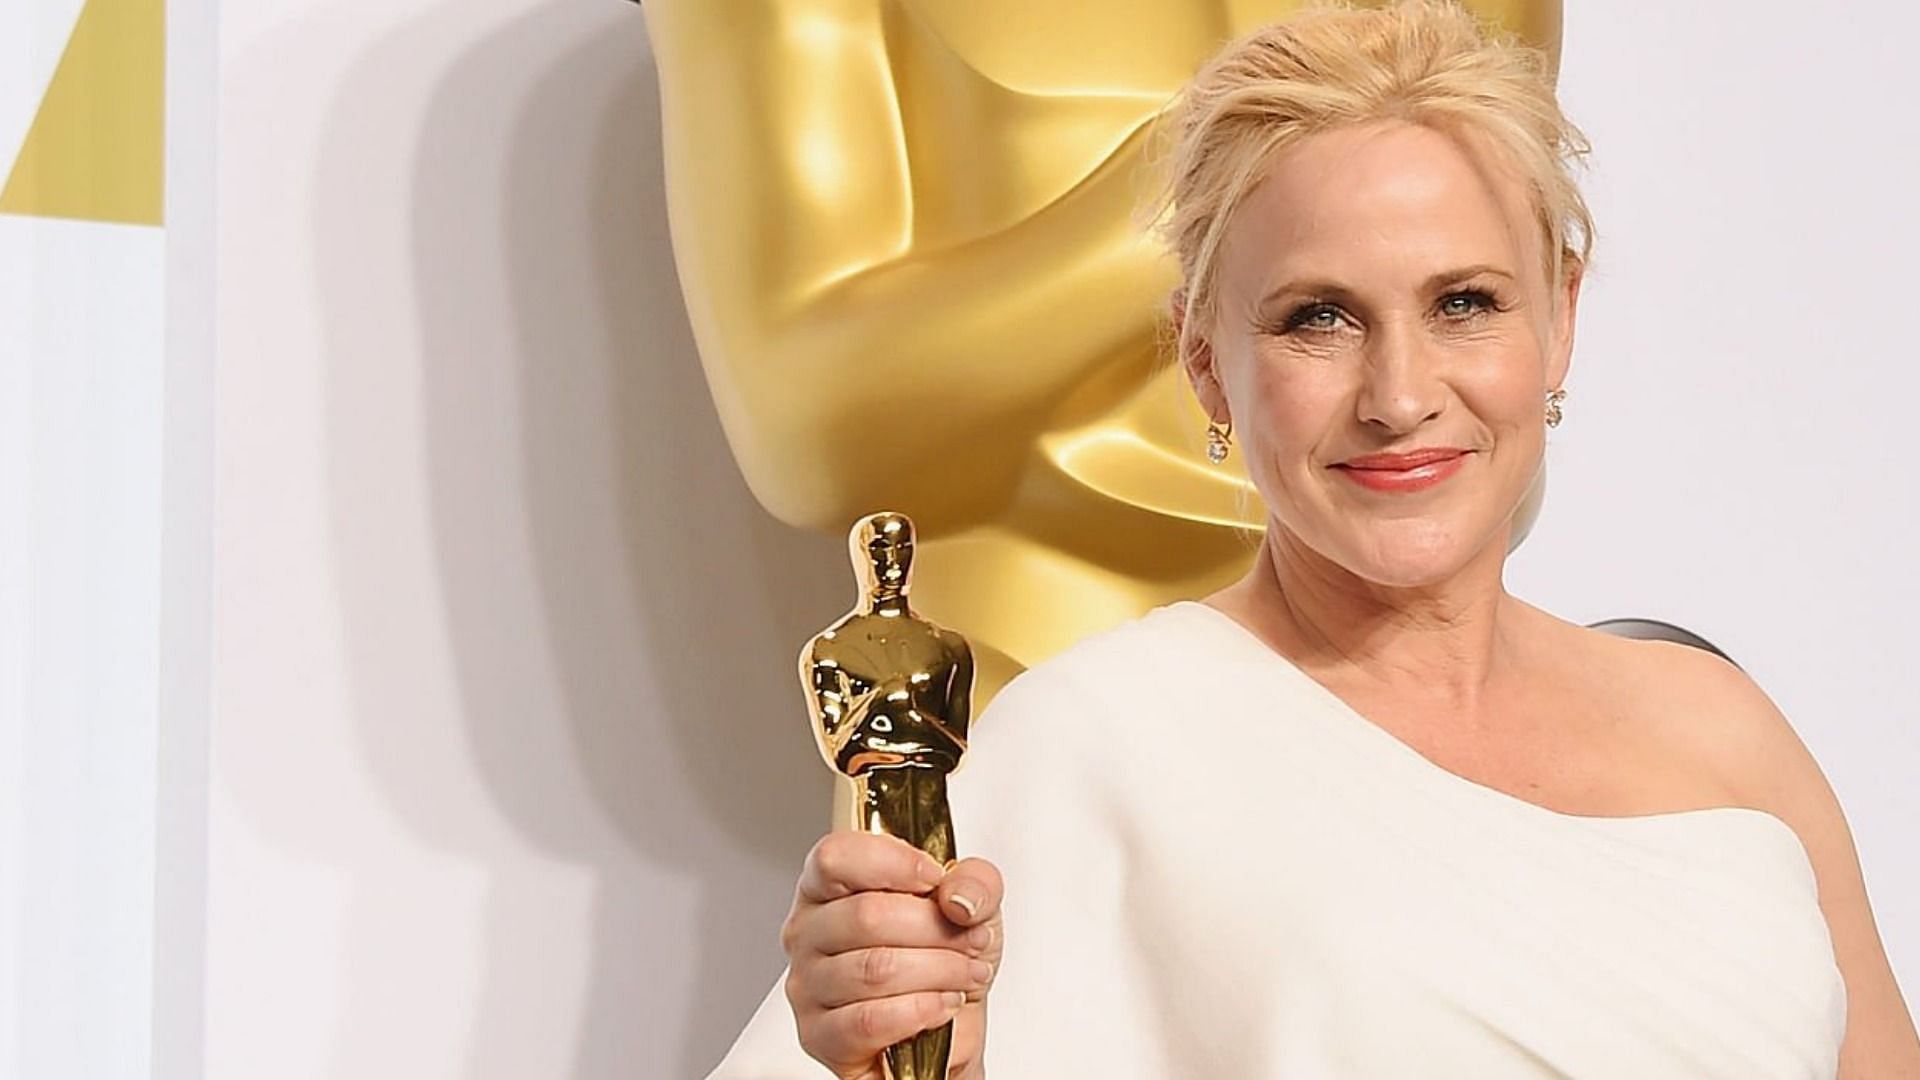 Patricia Arquette mistakenly demanded the removal of Russia from NATO (Image via Jason Merritt/Getty Images)